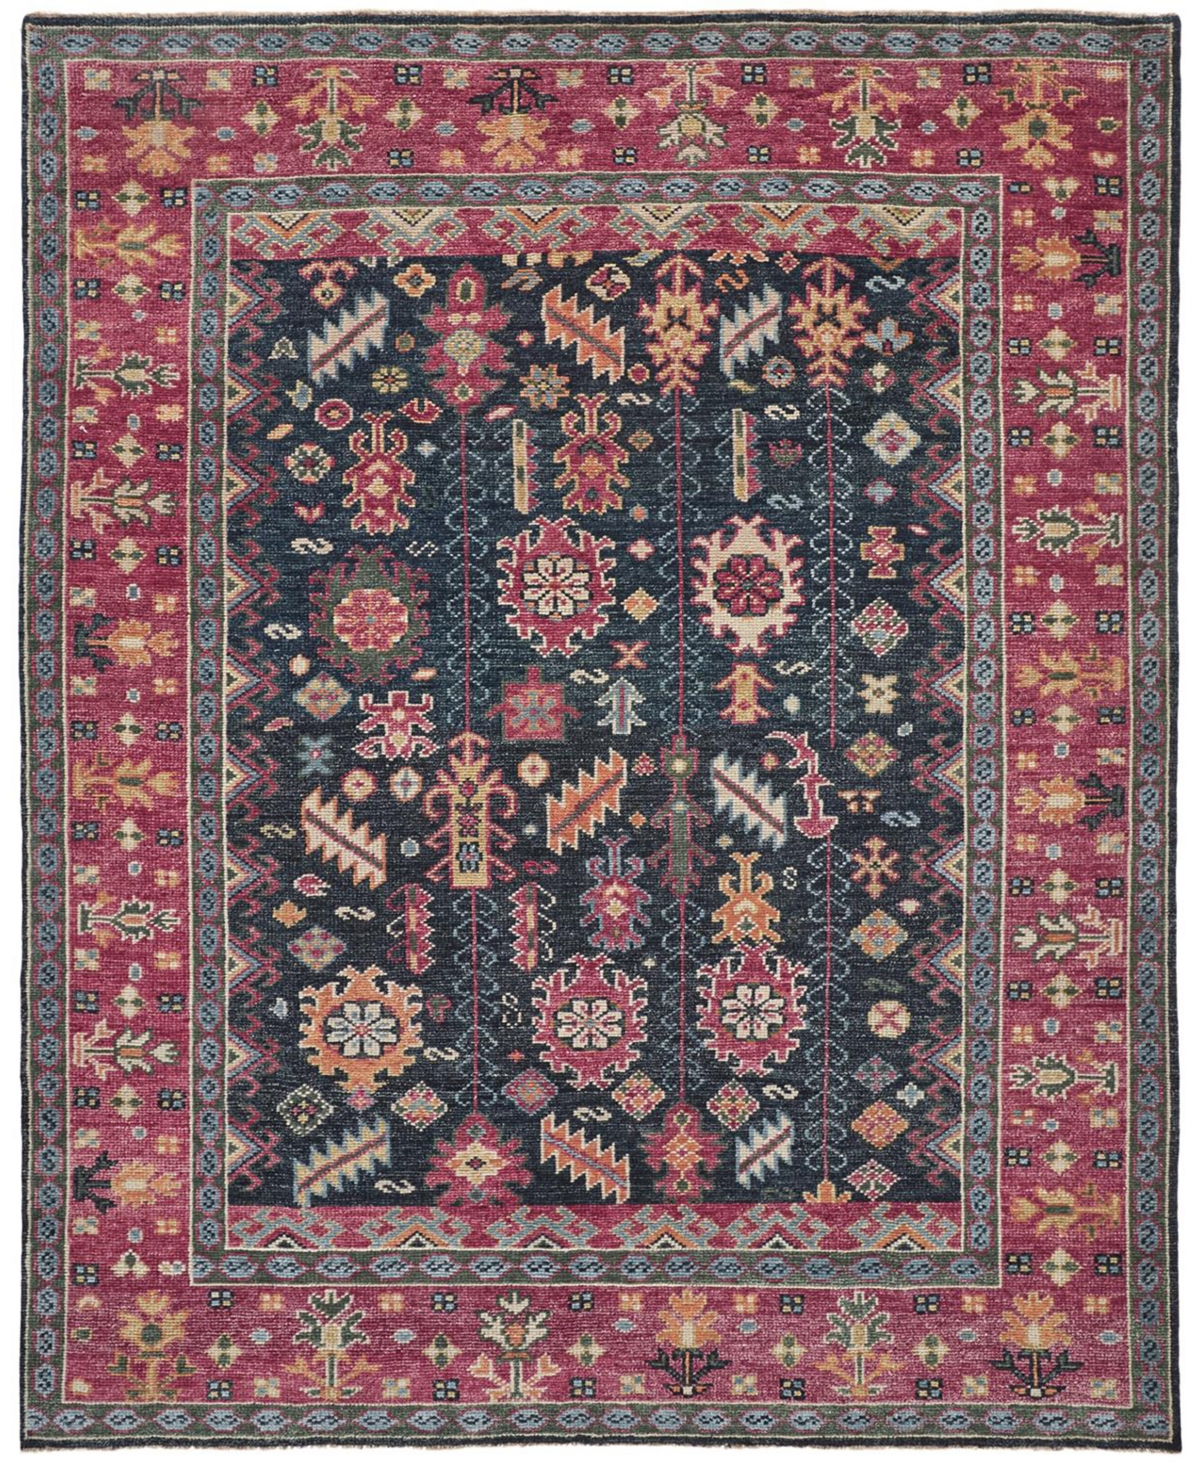 Feizy Vision VIS6741 8'6in x 11'6in Area Rug - Pink, Blue